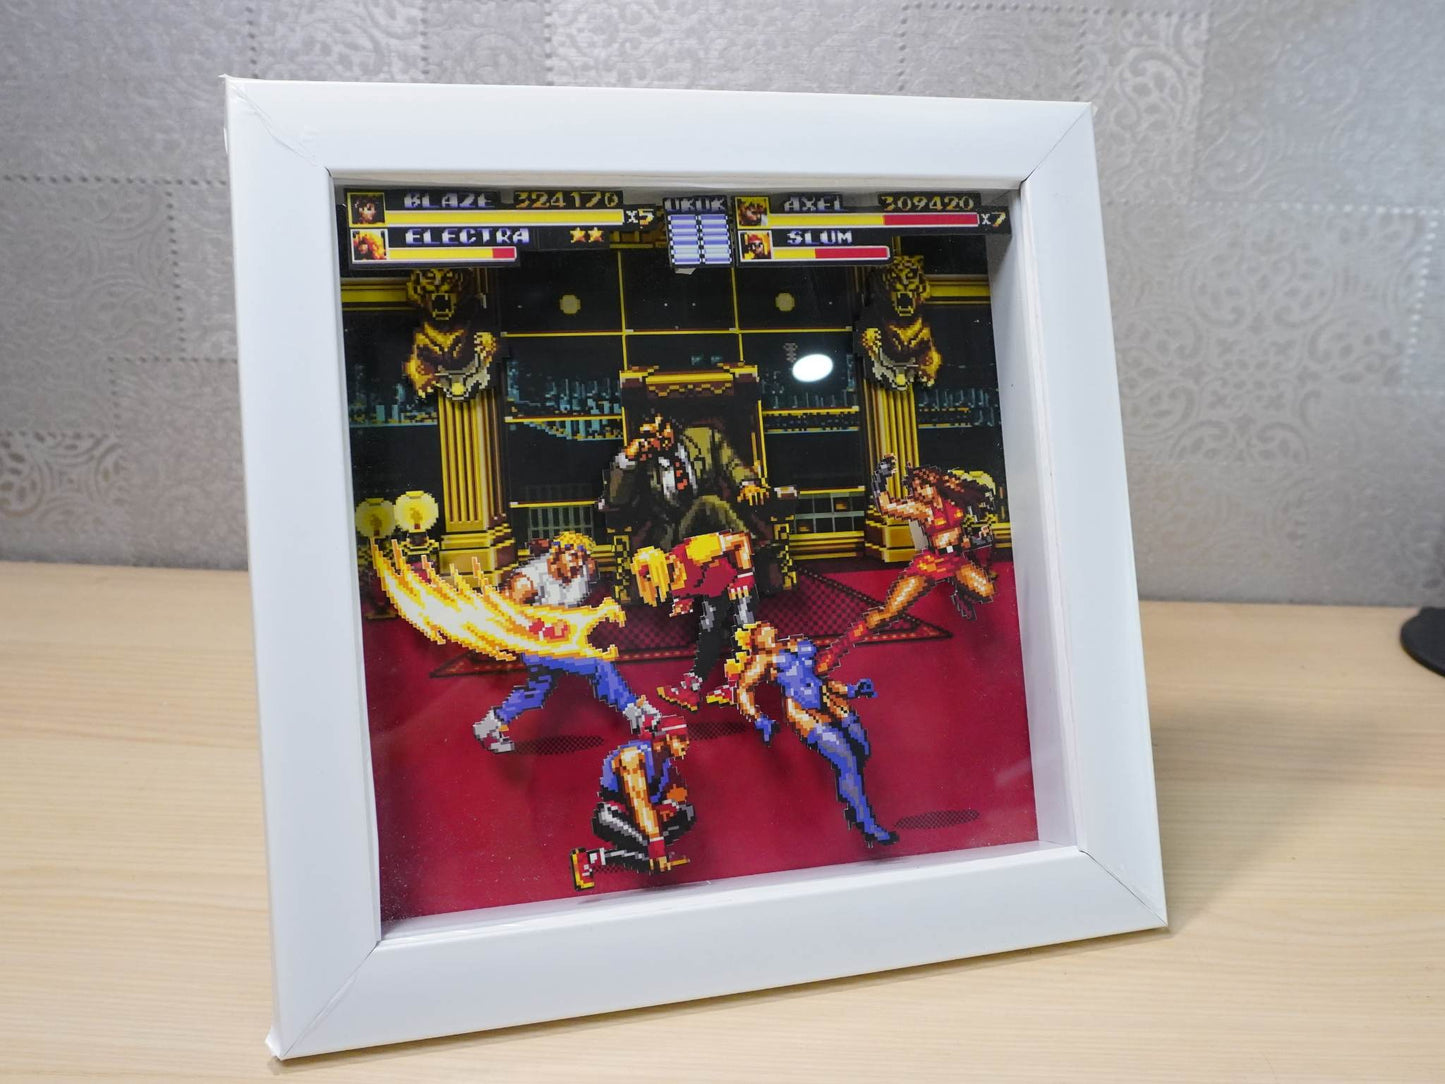 3D Retro Games Diorama Frame: Streets of Rage - Mr. X Scene - 20x20cm with Music